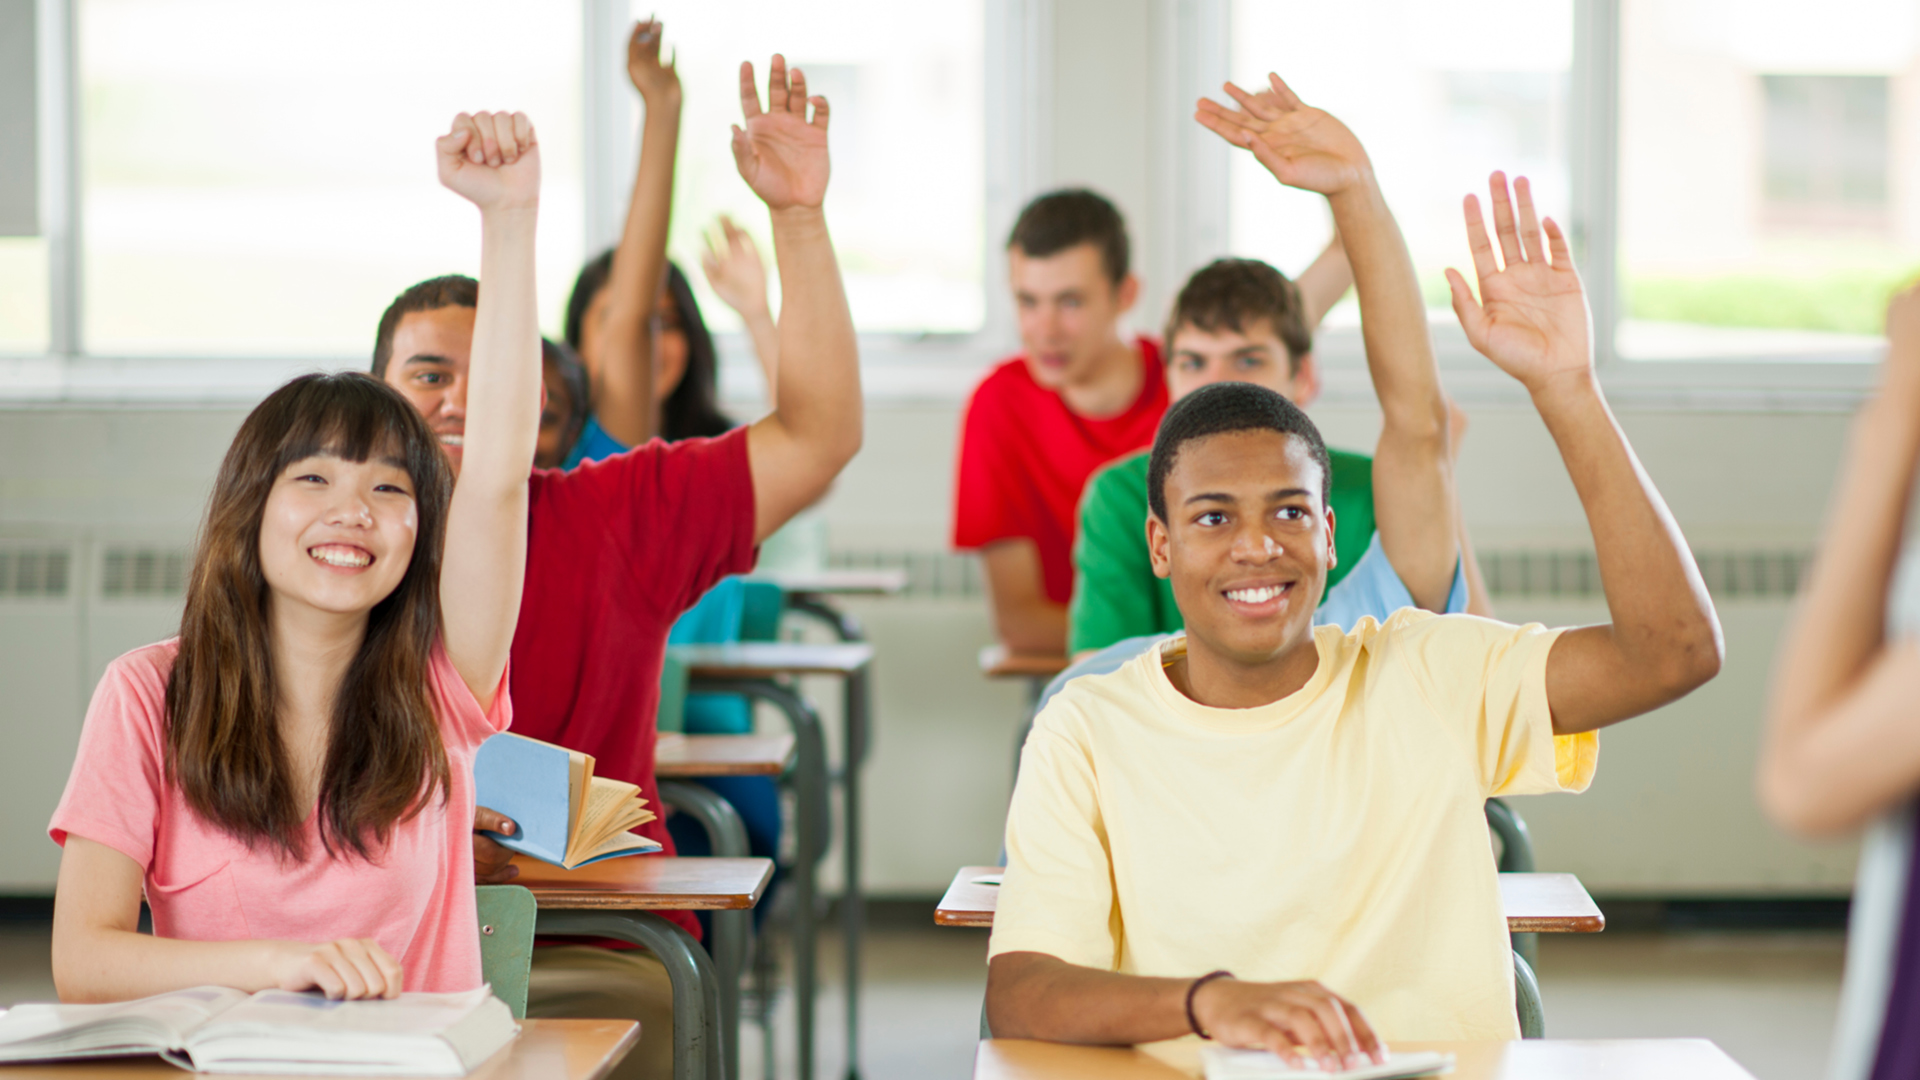 Students in a classroom raise their hands.